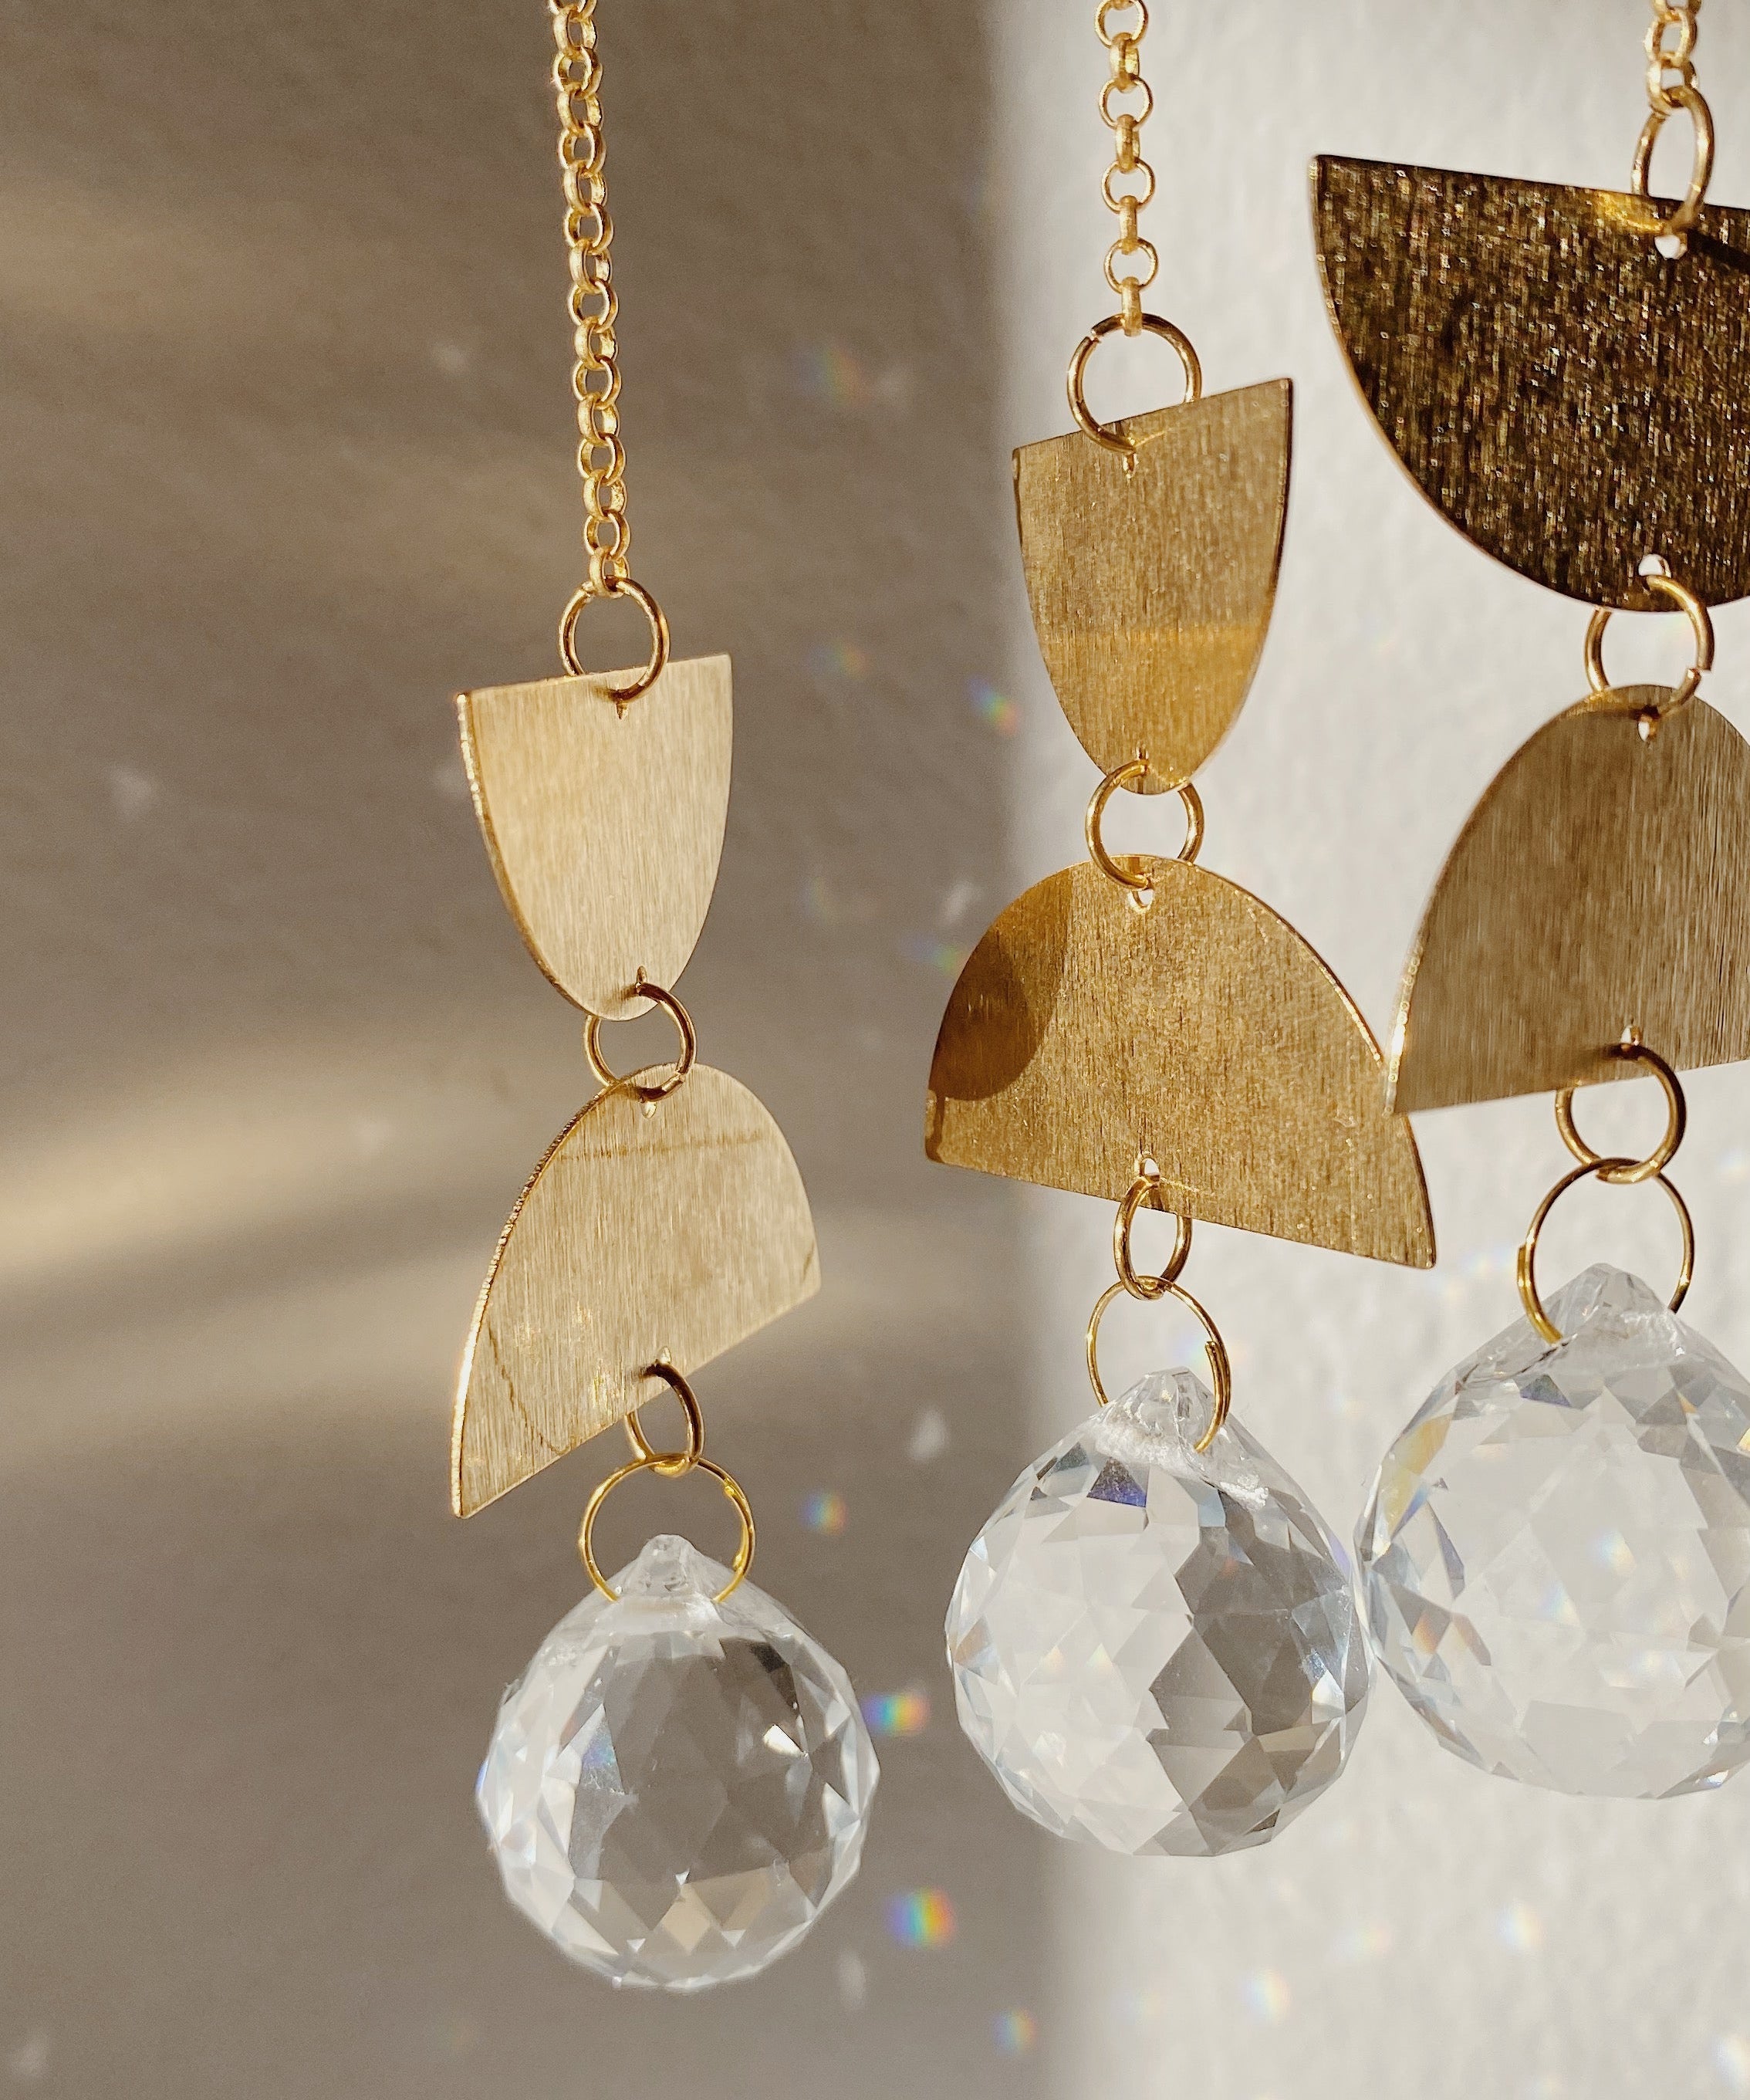 Hanging suncatcher crafted with brass and crystal - Balance Mini